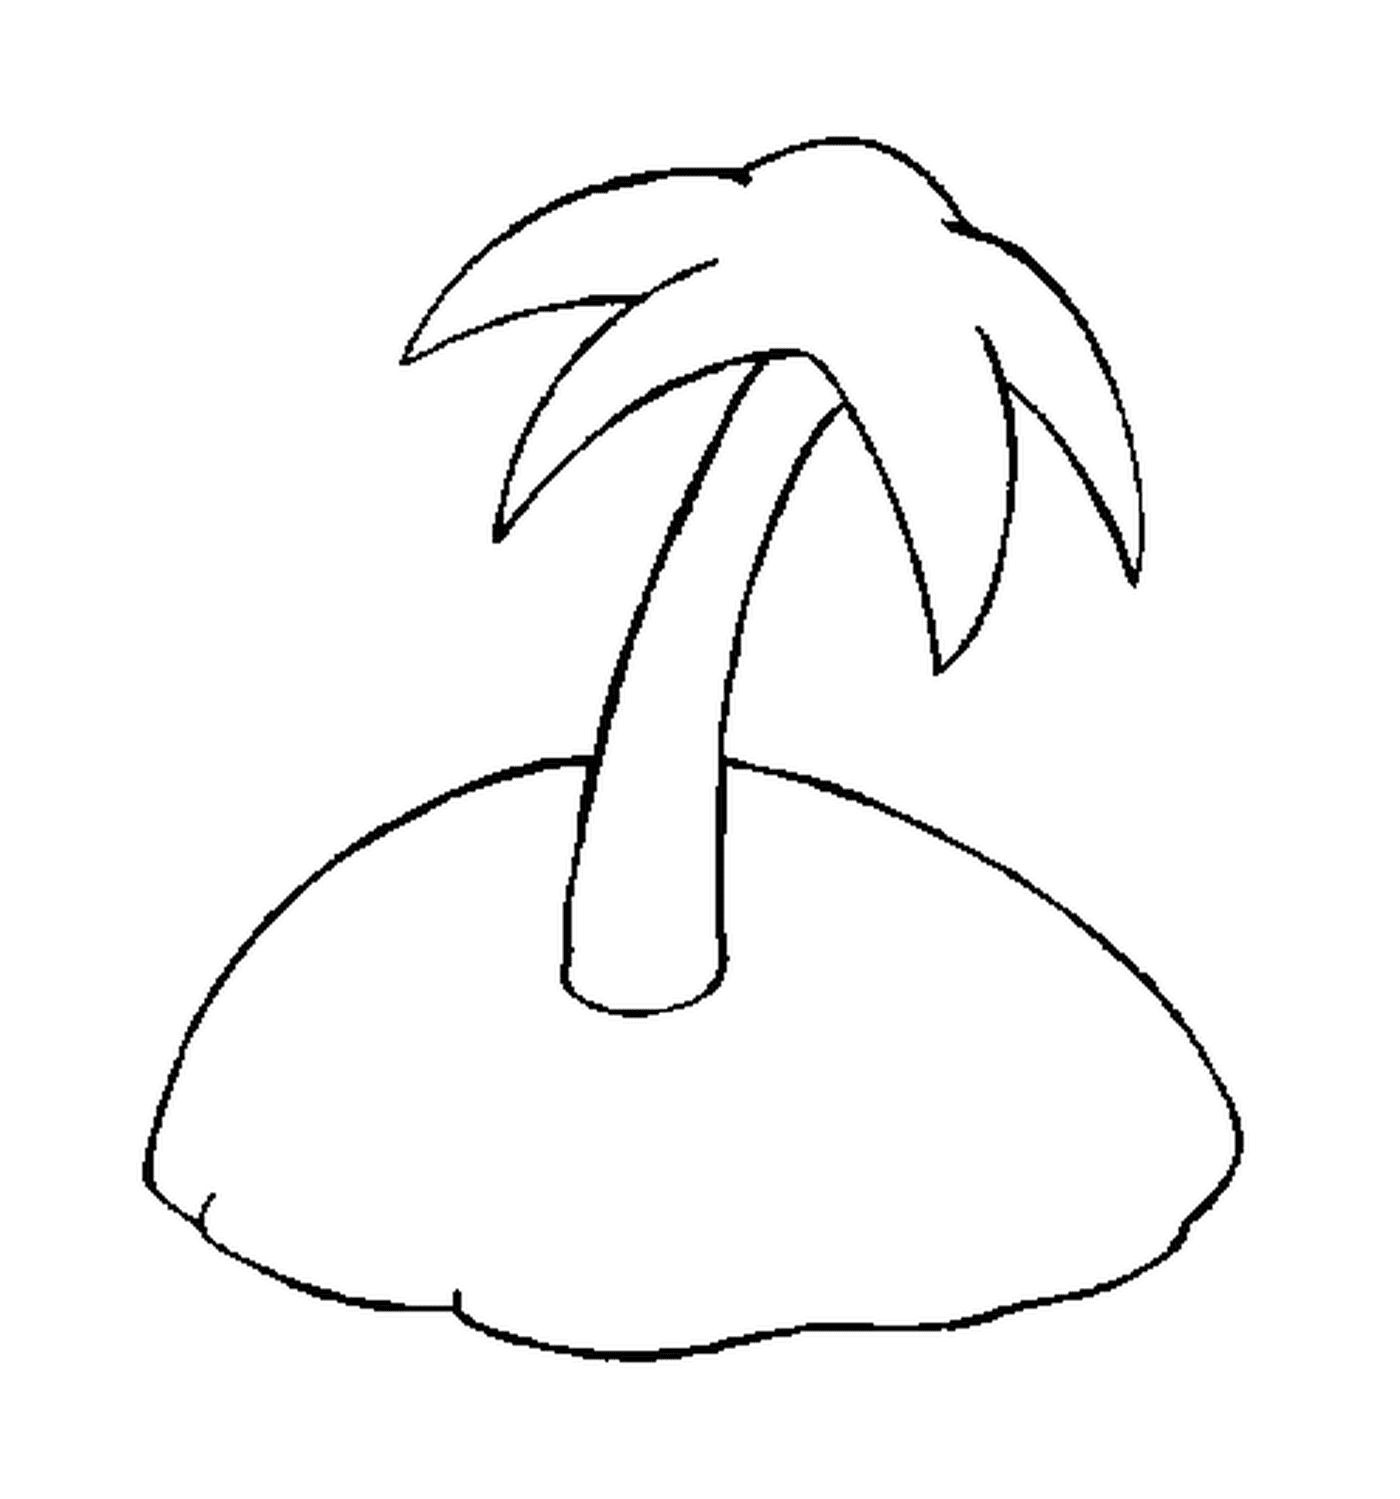  Unique palm on a deserted island 